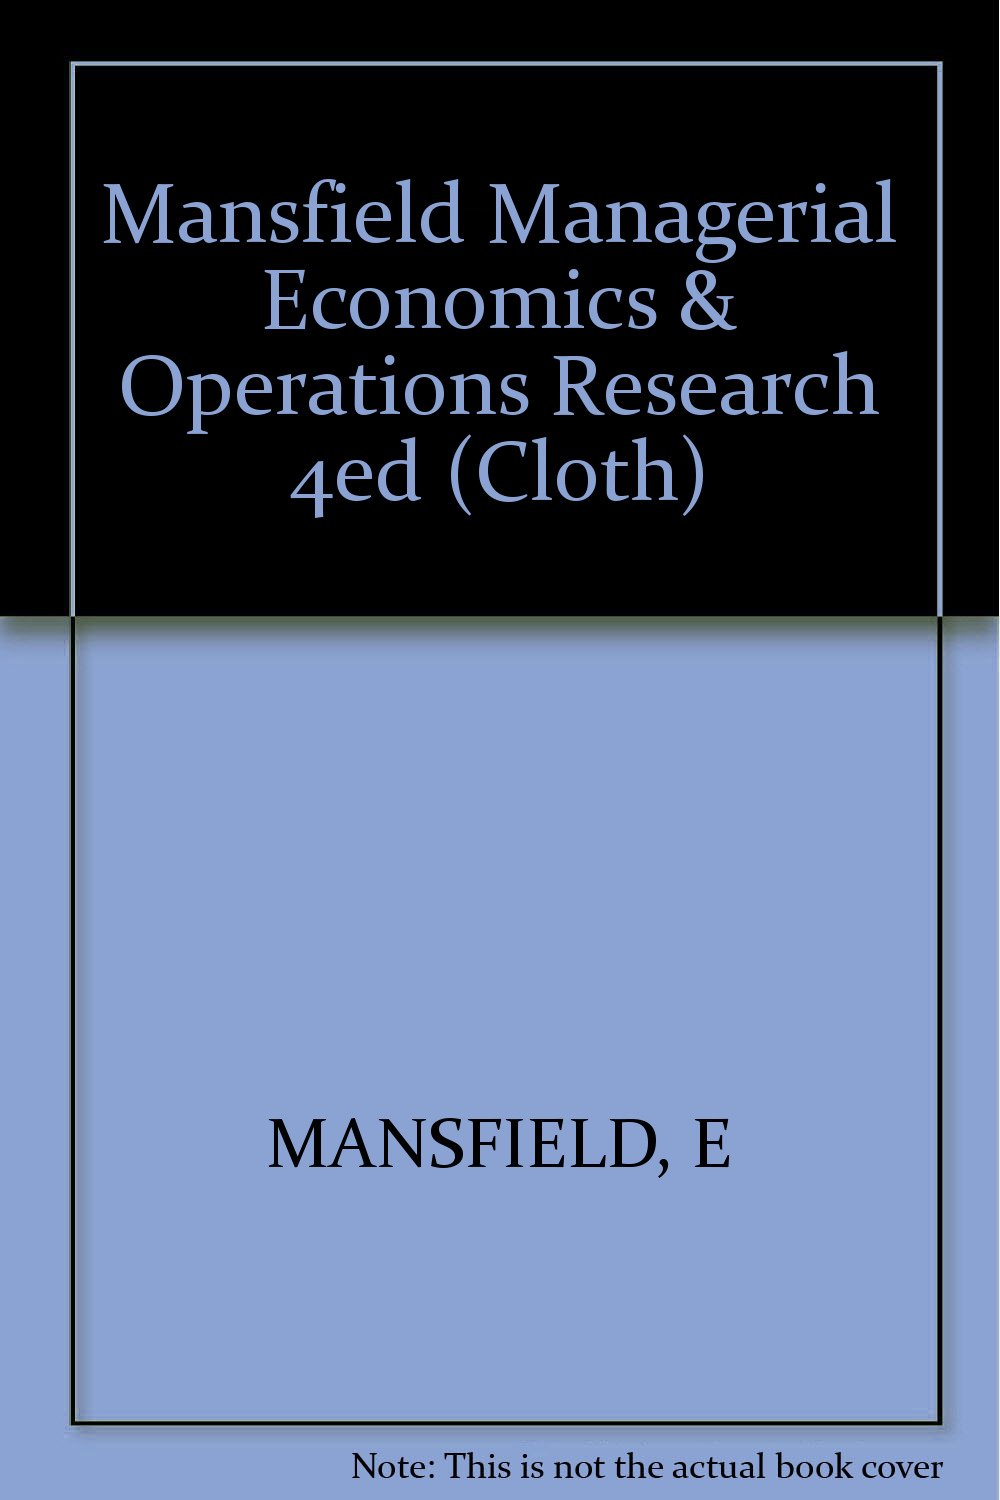 Managerial economics and operations research book written by Edwin Mansfield